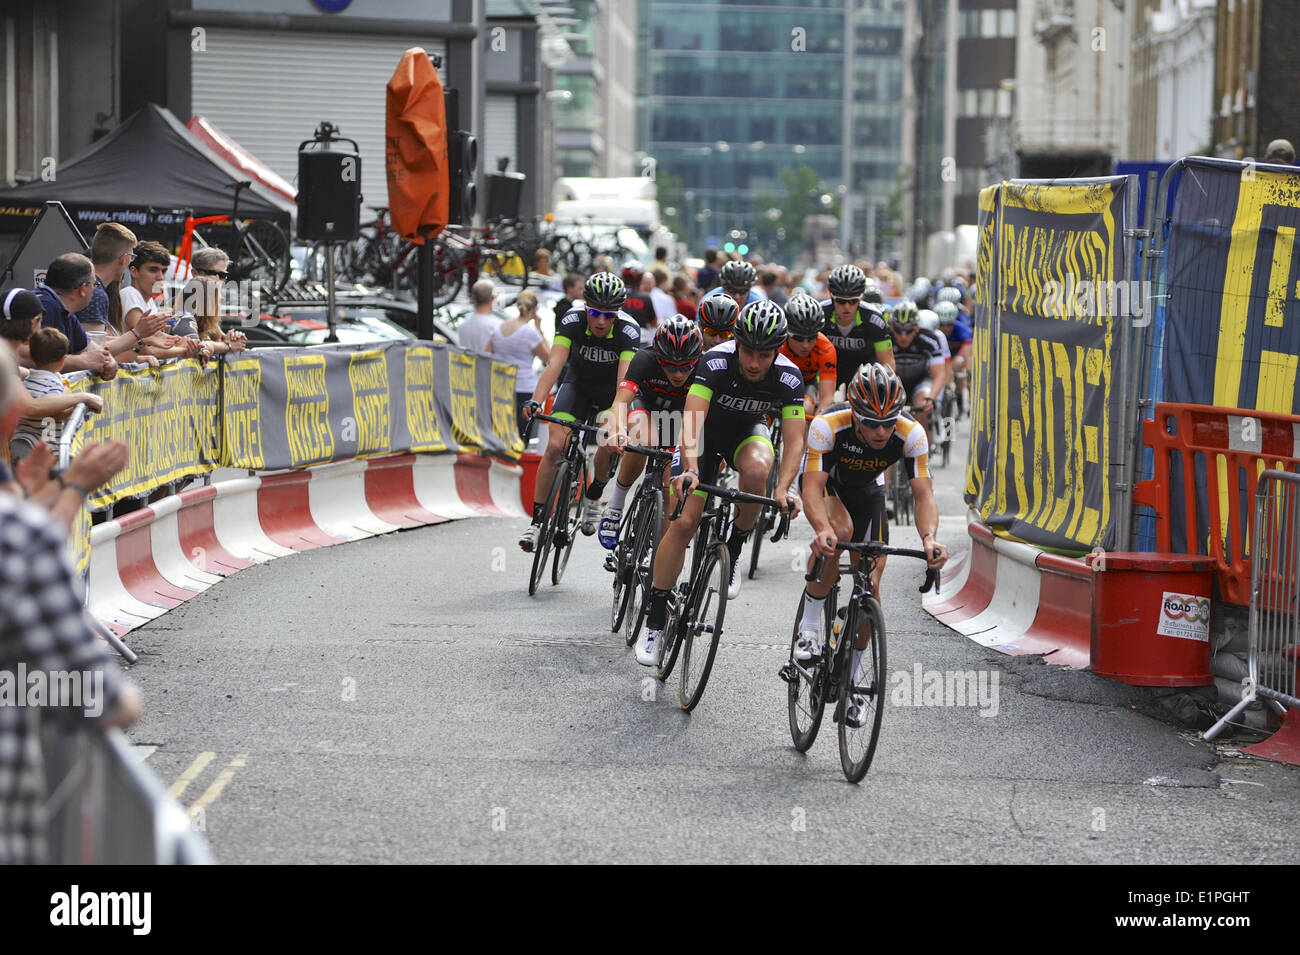 London, UK. 07th June, 2014. The peloton racing around Smithfield Market during the Leigh Day Kermesse Bike Race during the Jupiter London Nocturne cycling event. The race was won by Alex Minting (Neon-Velo) with a time of 37min06sec. Credit:  Michael Preston/Alamy Live News Stock Photo